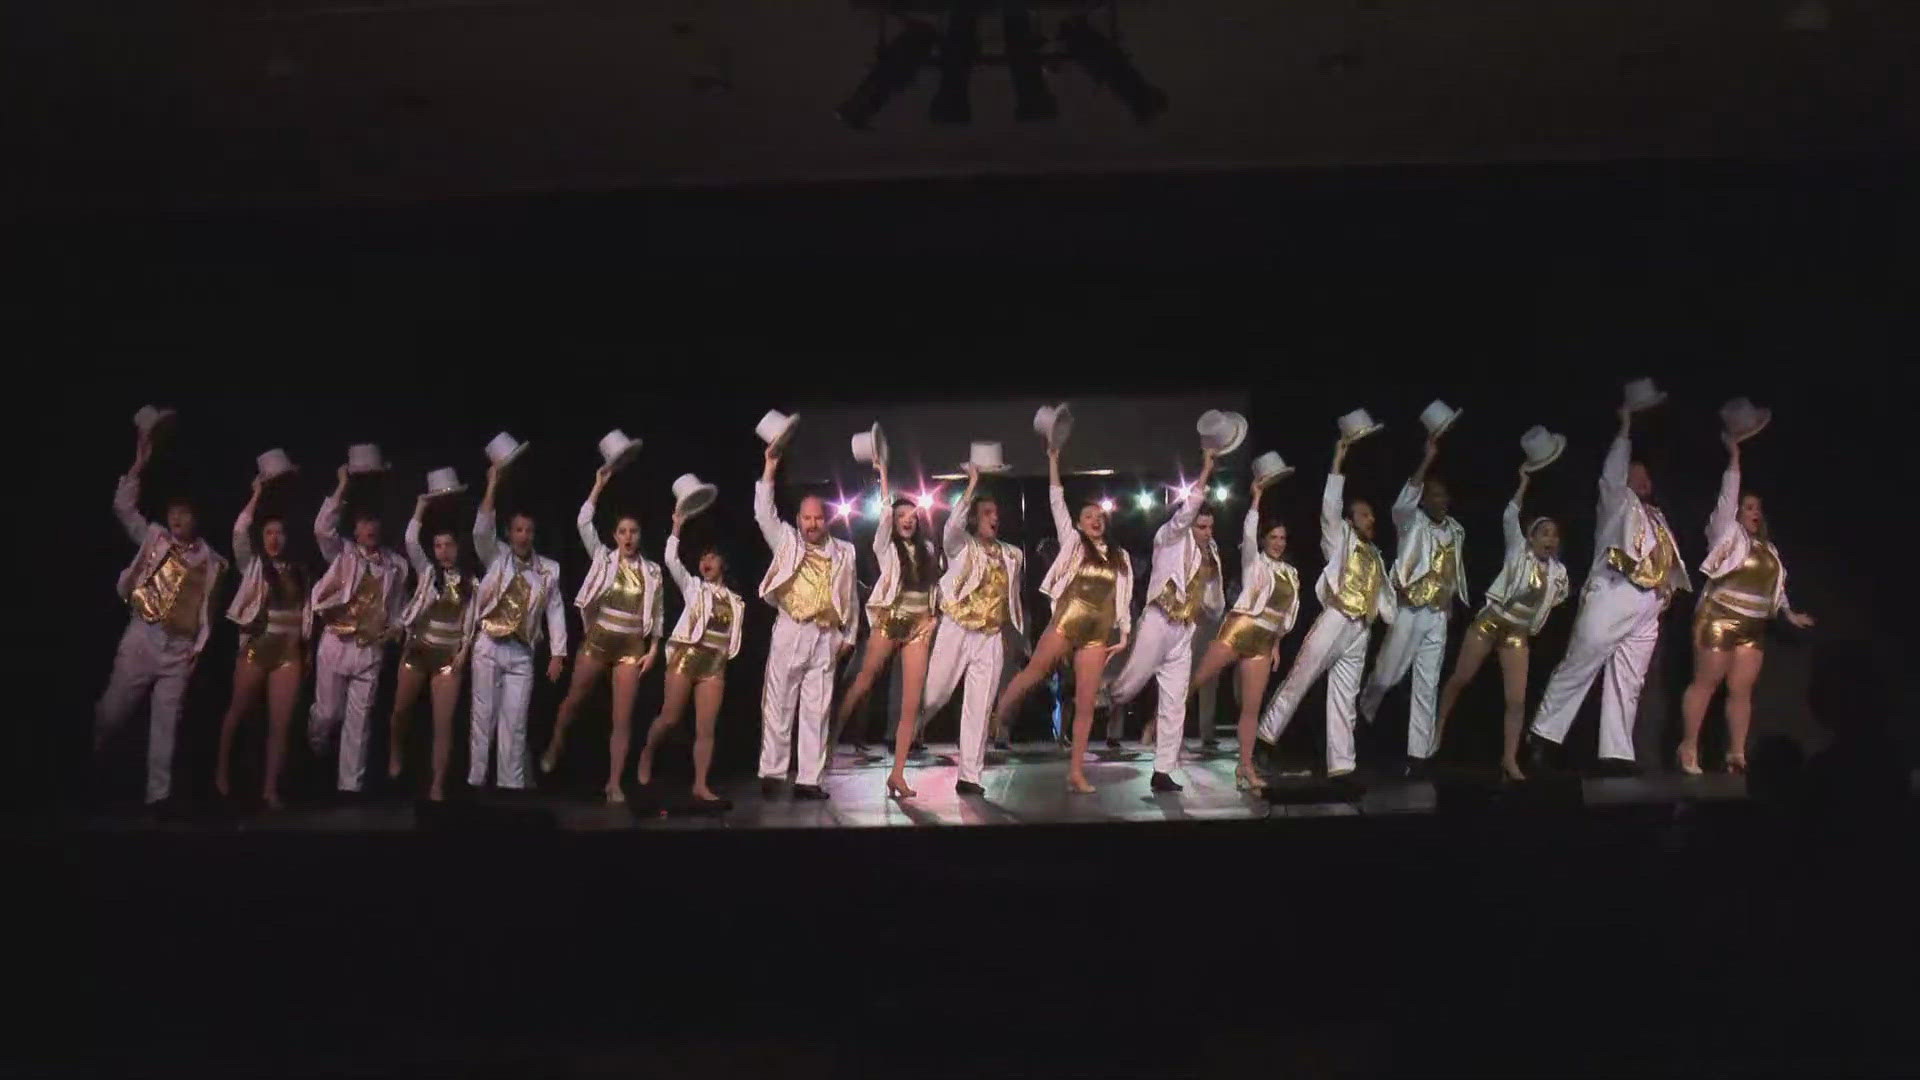 Rocklin Community Theatre will perform "A Chorus Line" from April 26 through May 12.